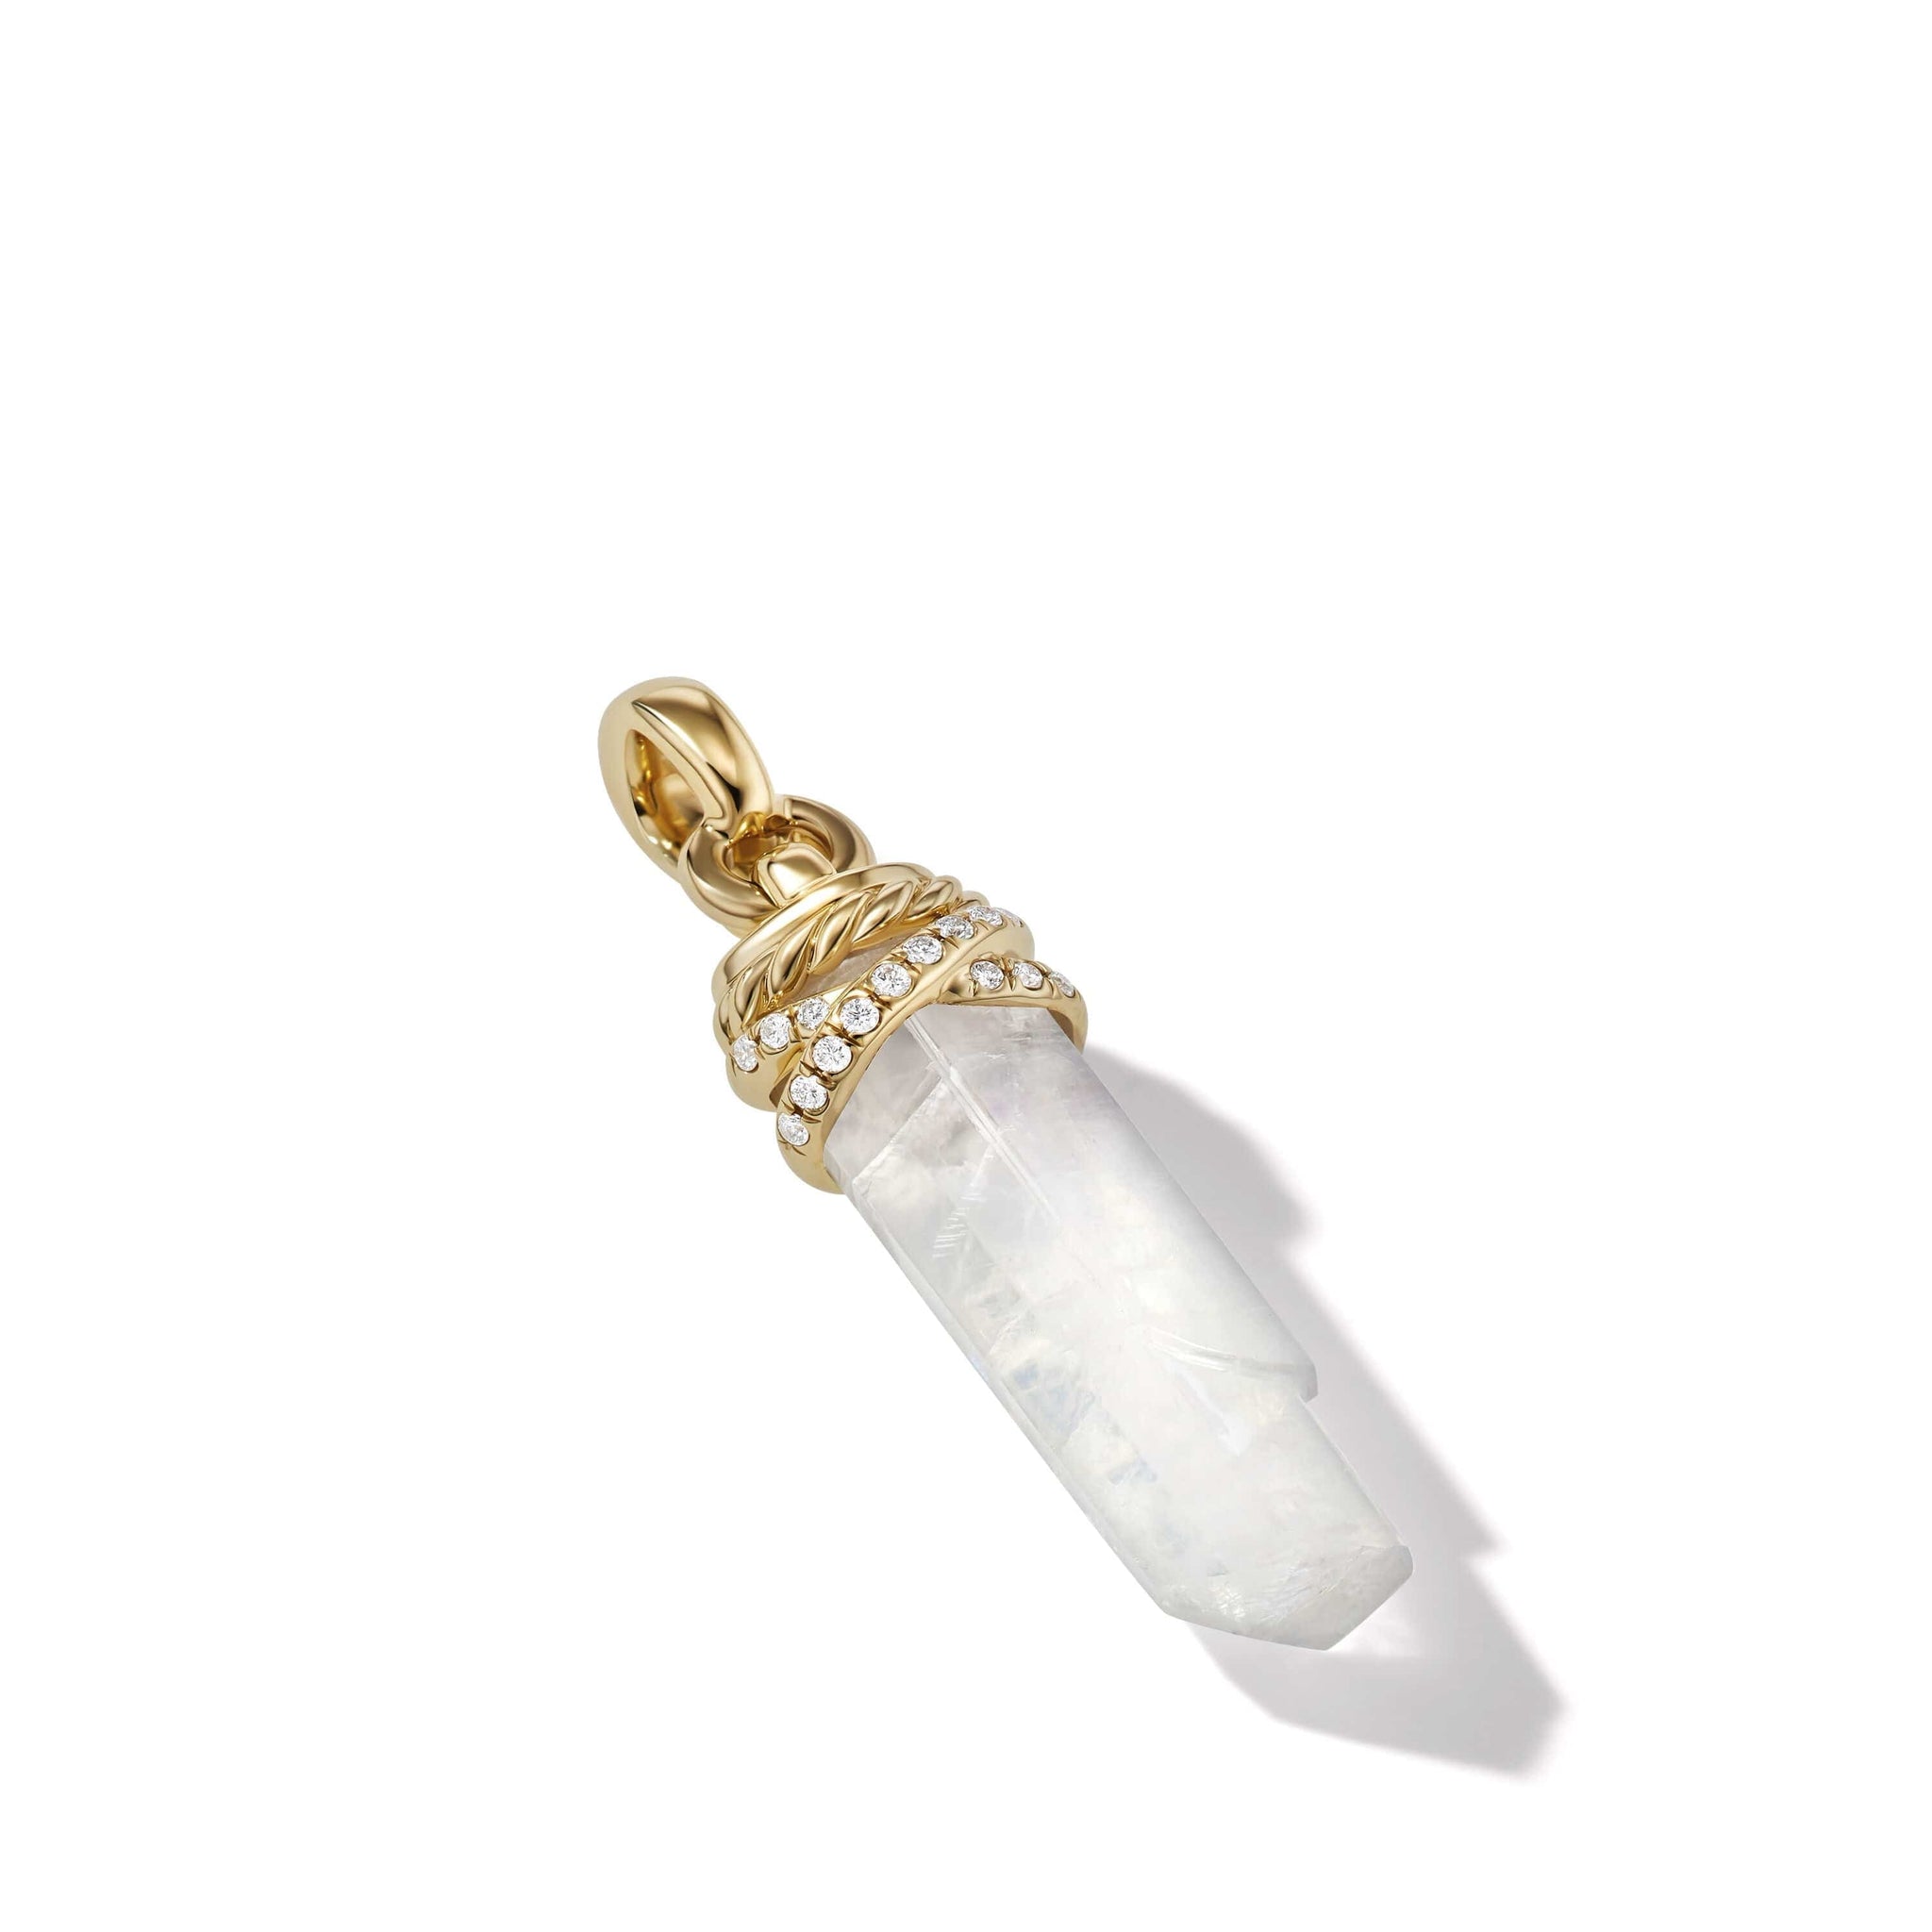 Wrapped Rainbow Moonstone Crystal Amulet with 18K Yellow Gold and Pavé Diamonds